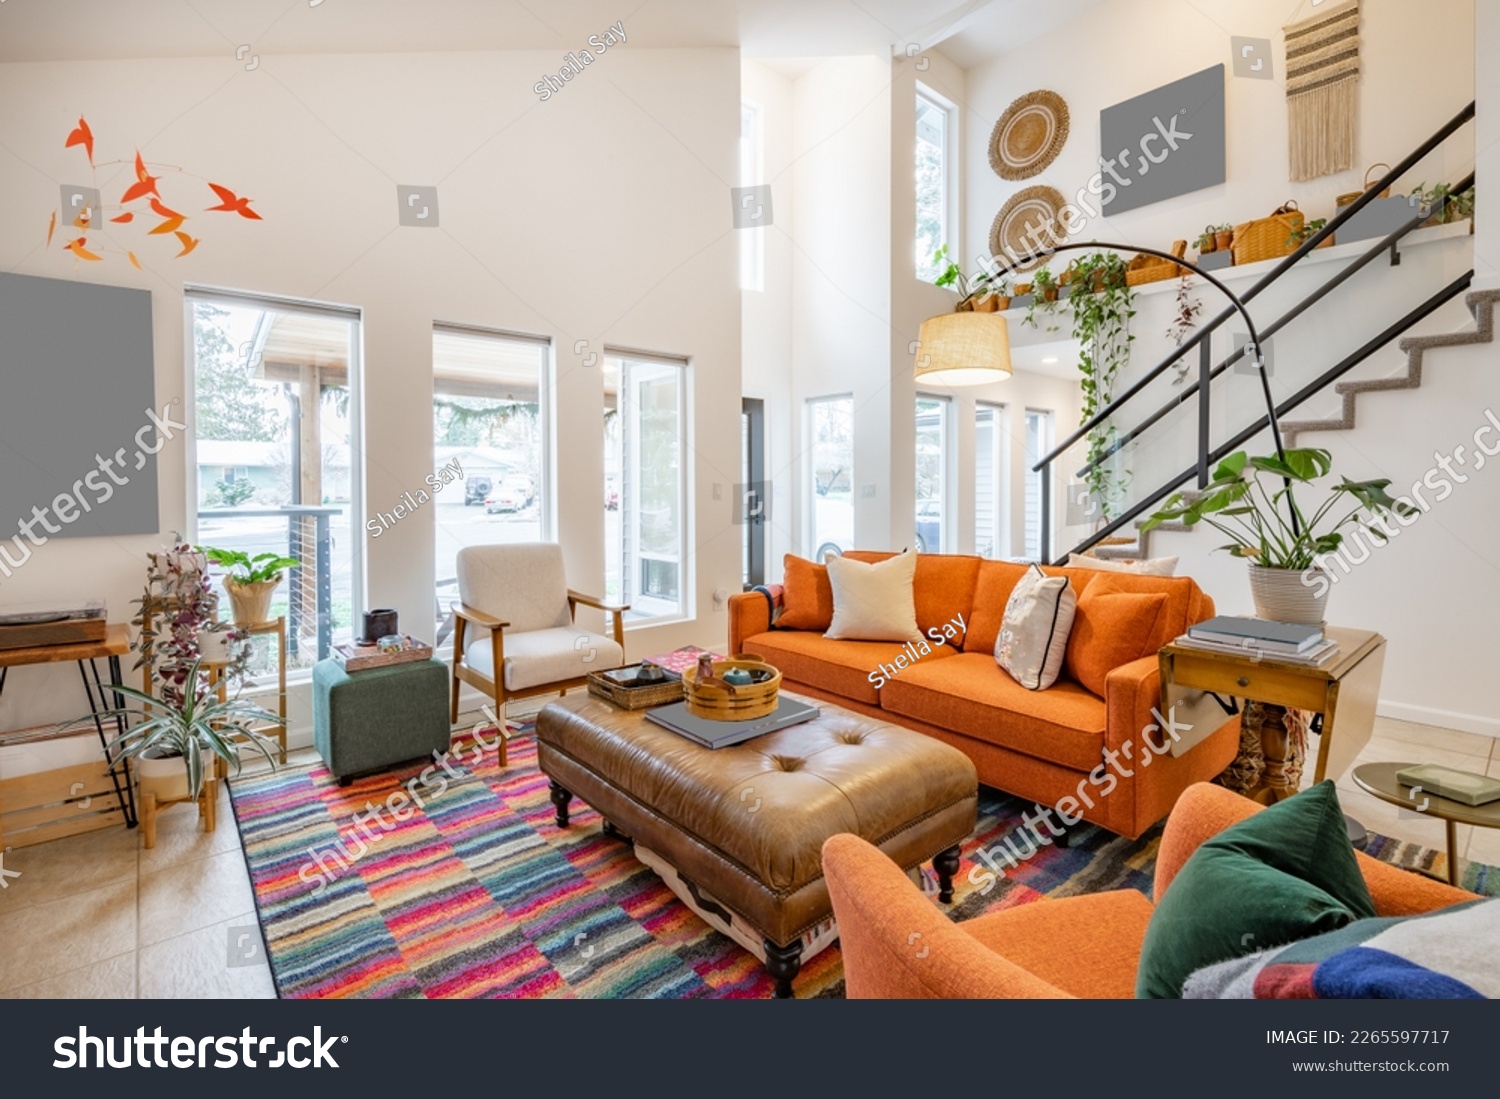 Bohemian style living room with orange sofa colored chairs books houseplants stair case and cluttered decor #2265597717